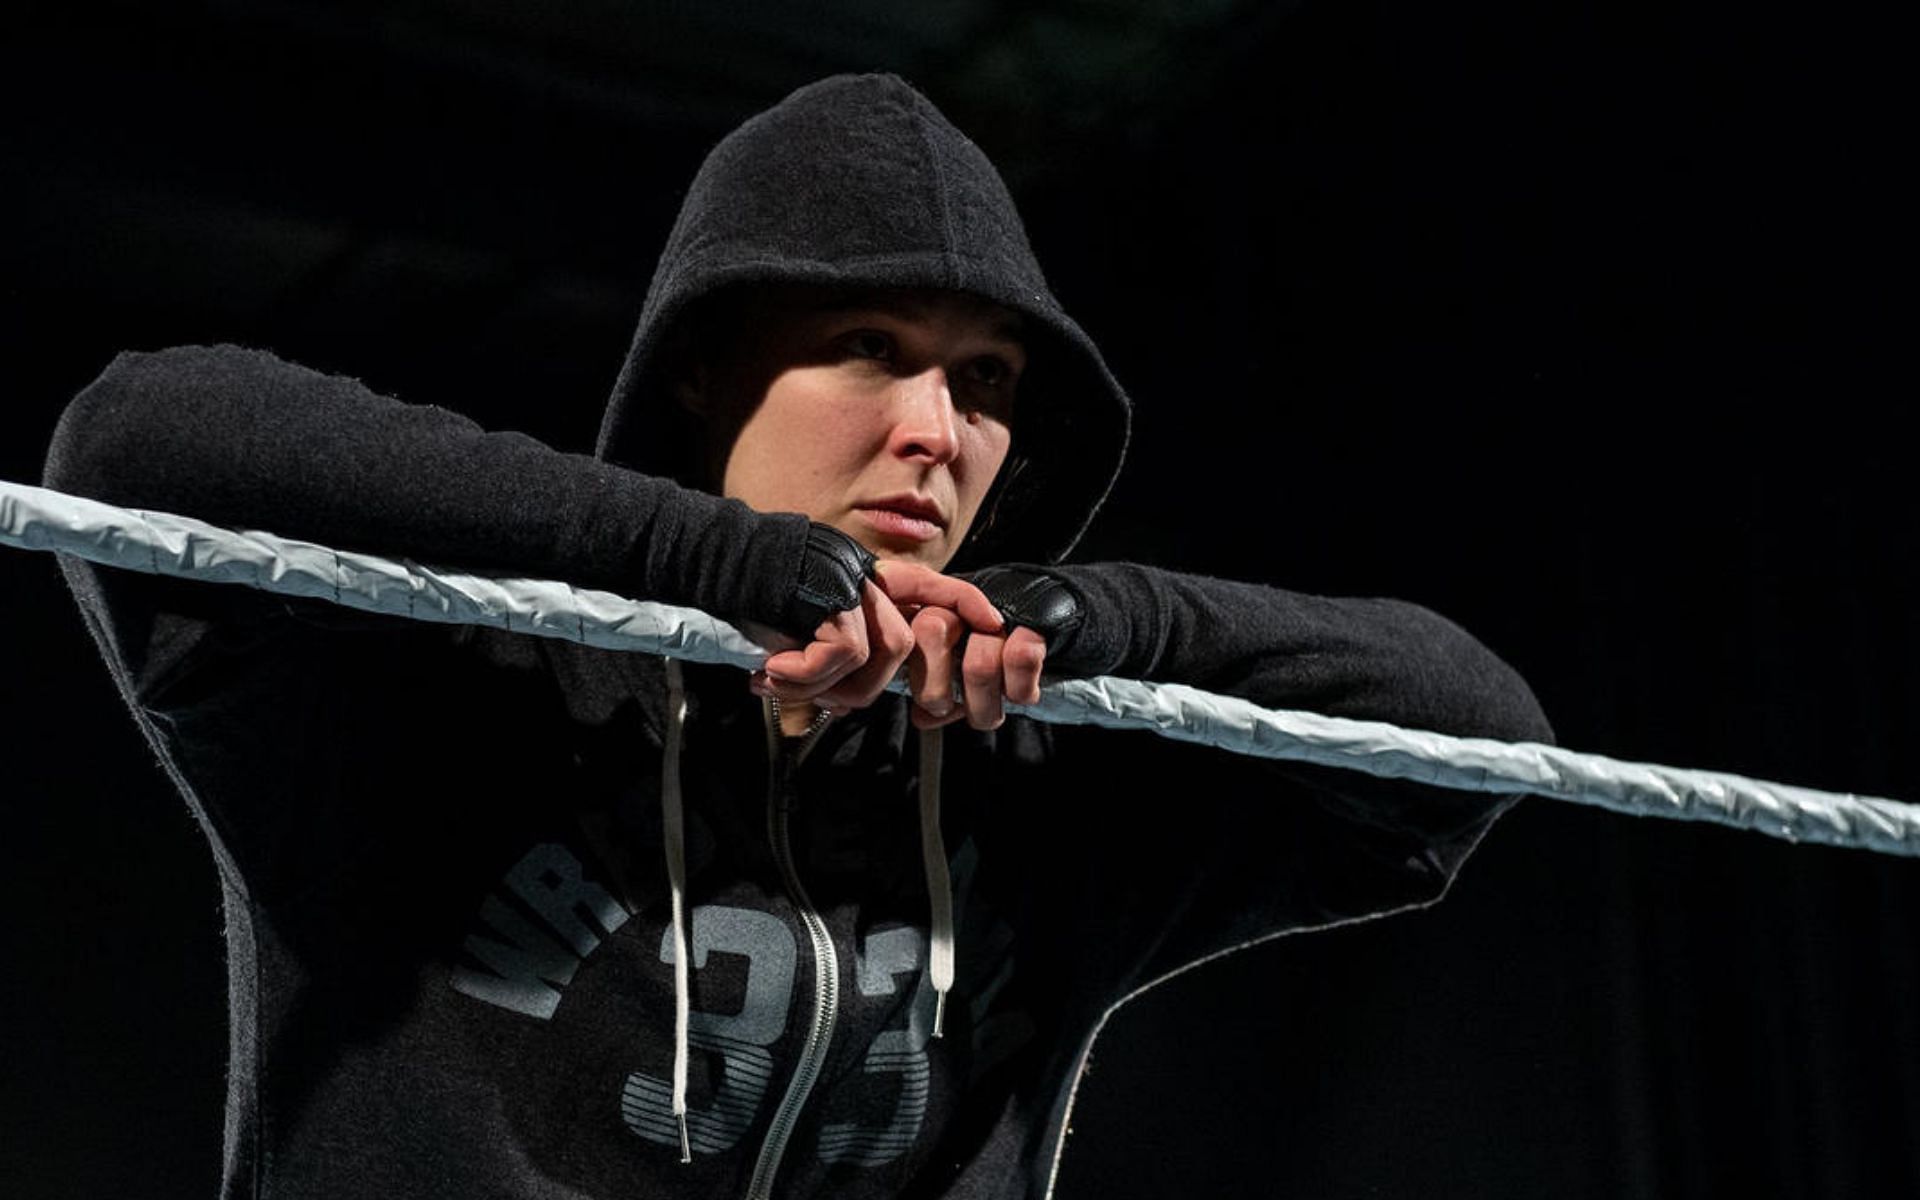 Ronda Rousey is a former SmackDown Women